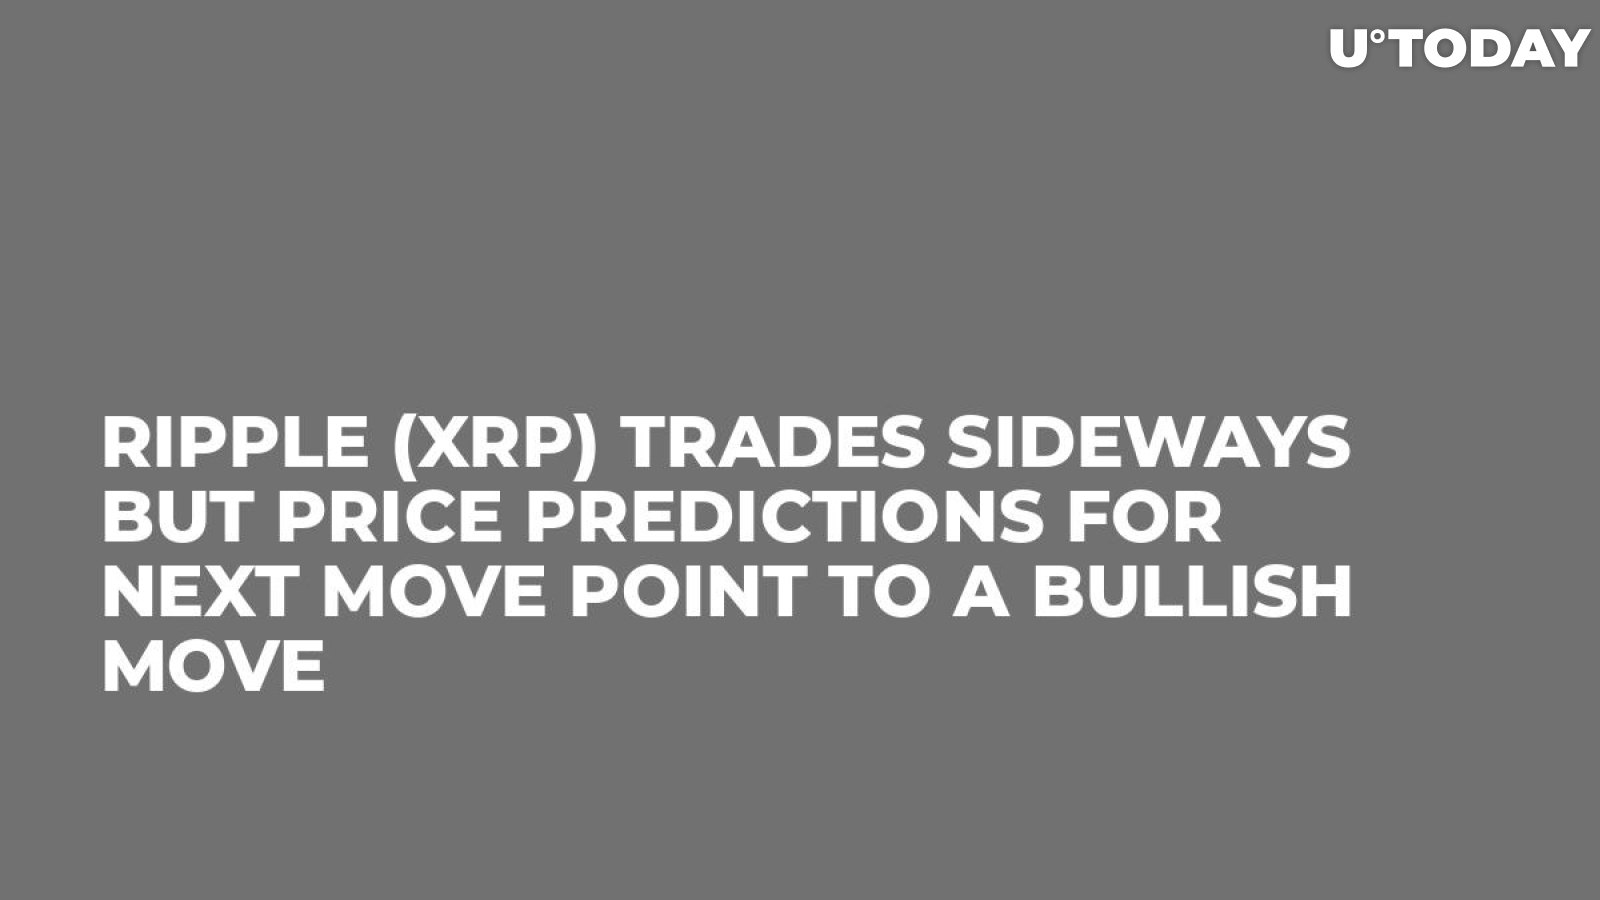 Ripple (XRP) Trades Sideways but Price Predictions for Next Move Point to a Bullish Move